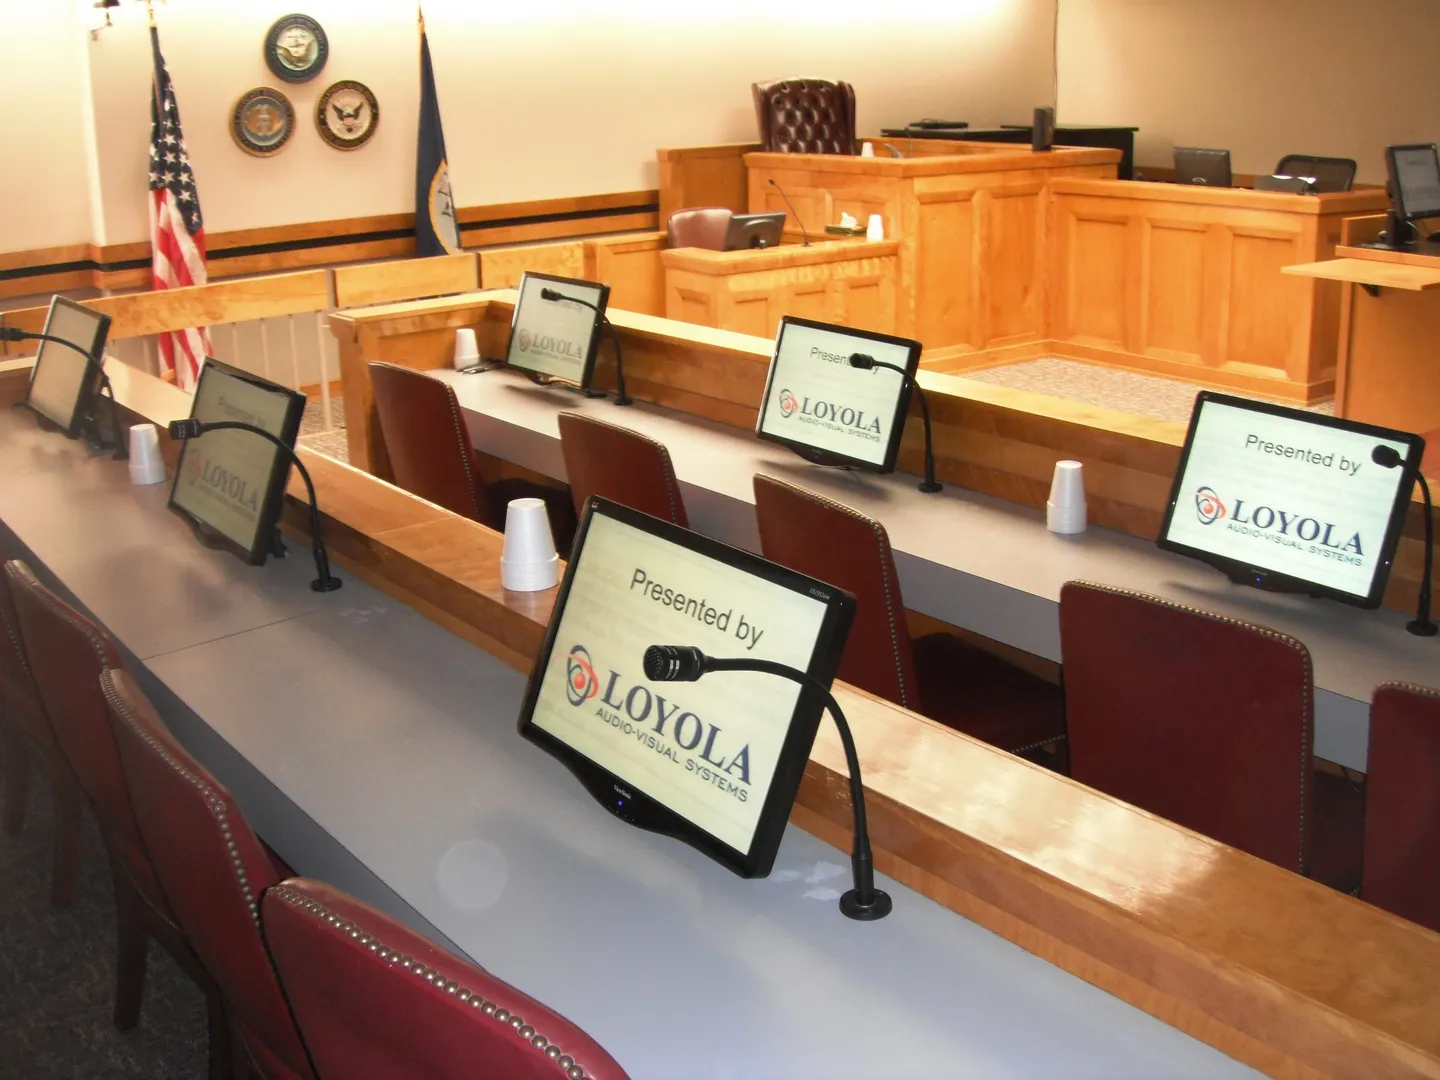 A courtroom with a tablet and microphone on the desk.